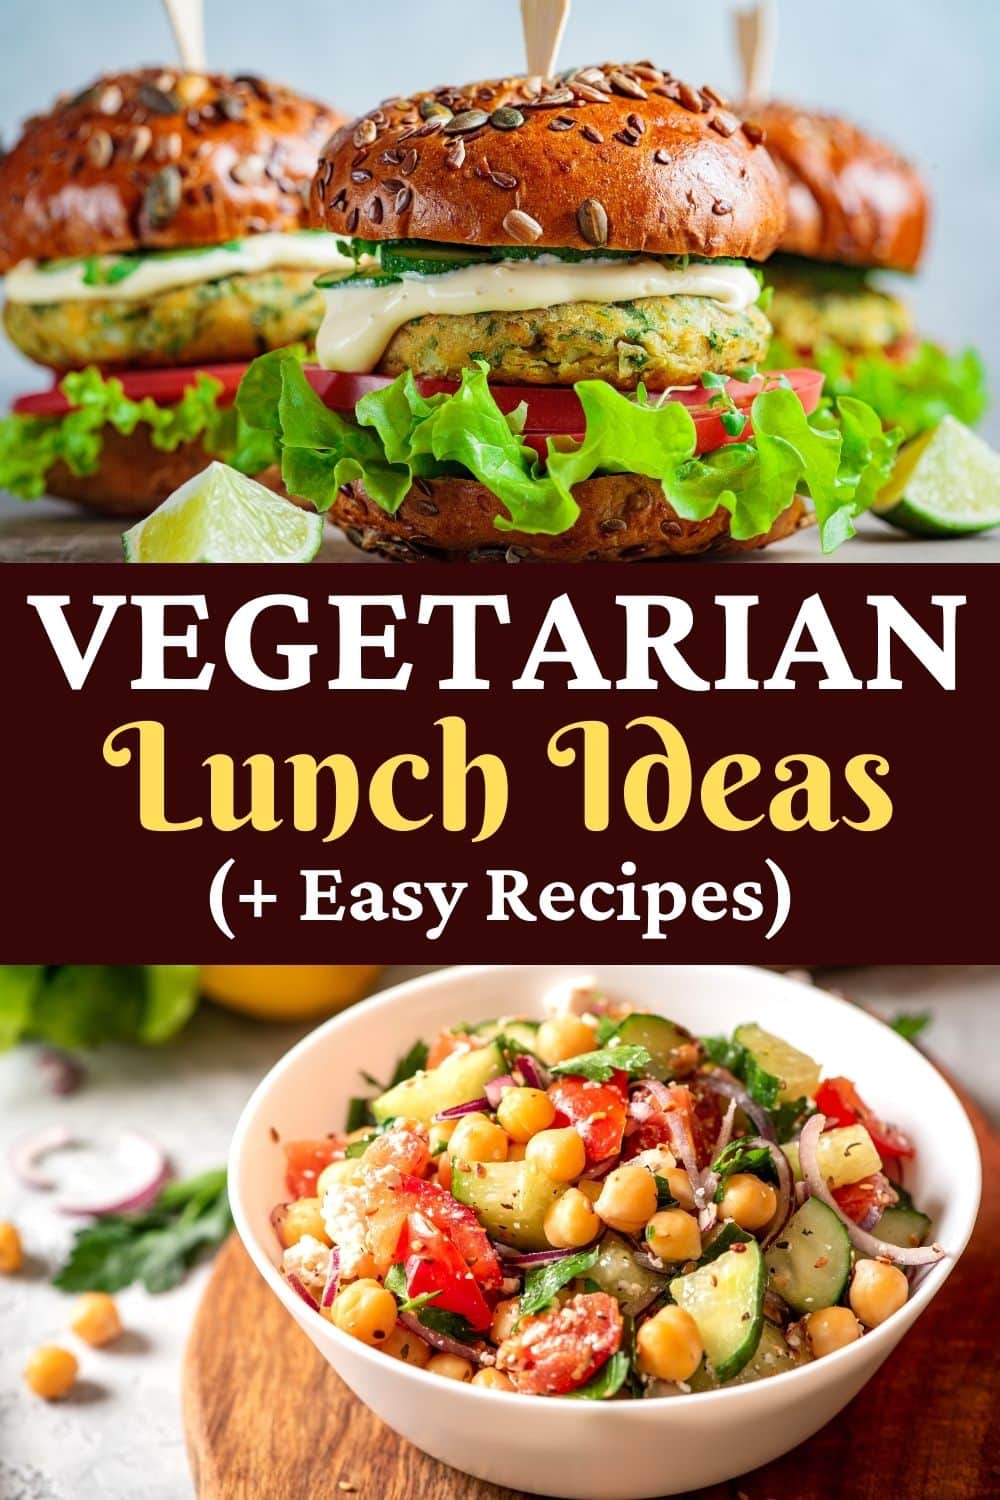 20 Vegetarian Lunch Ideas (+ Easy Recipes) - Insanely Good